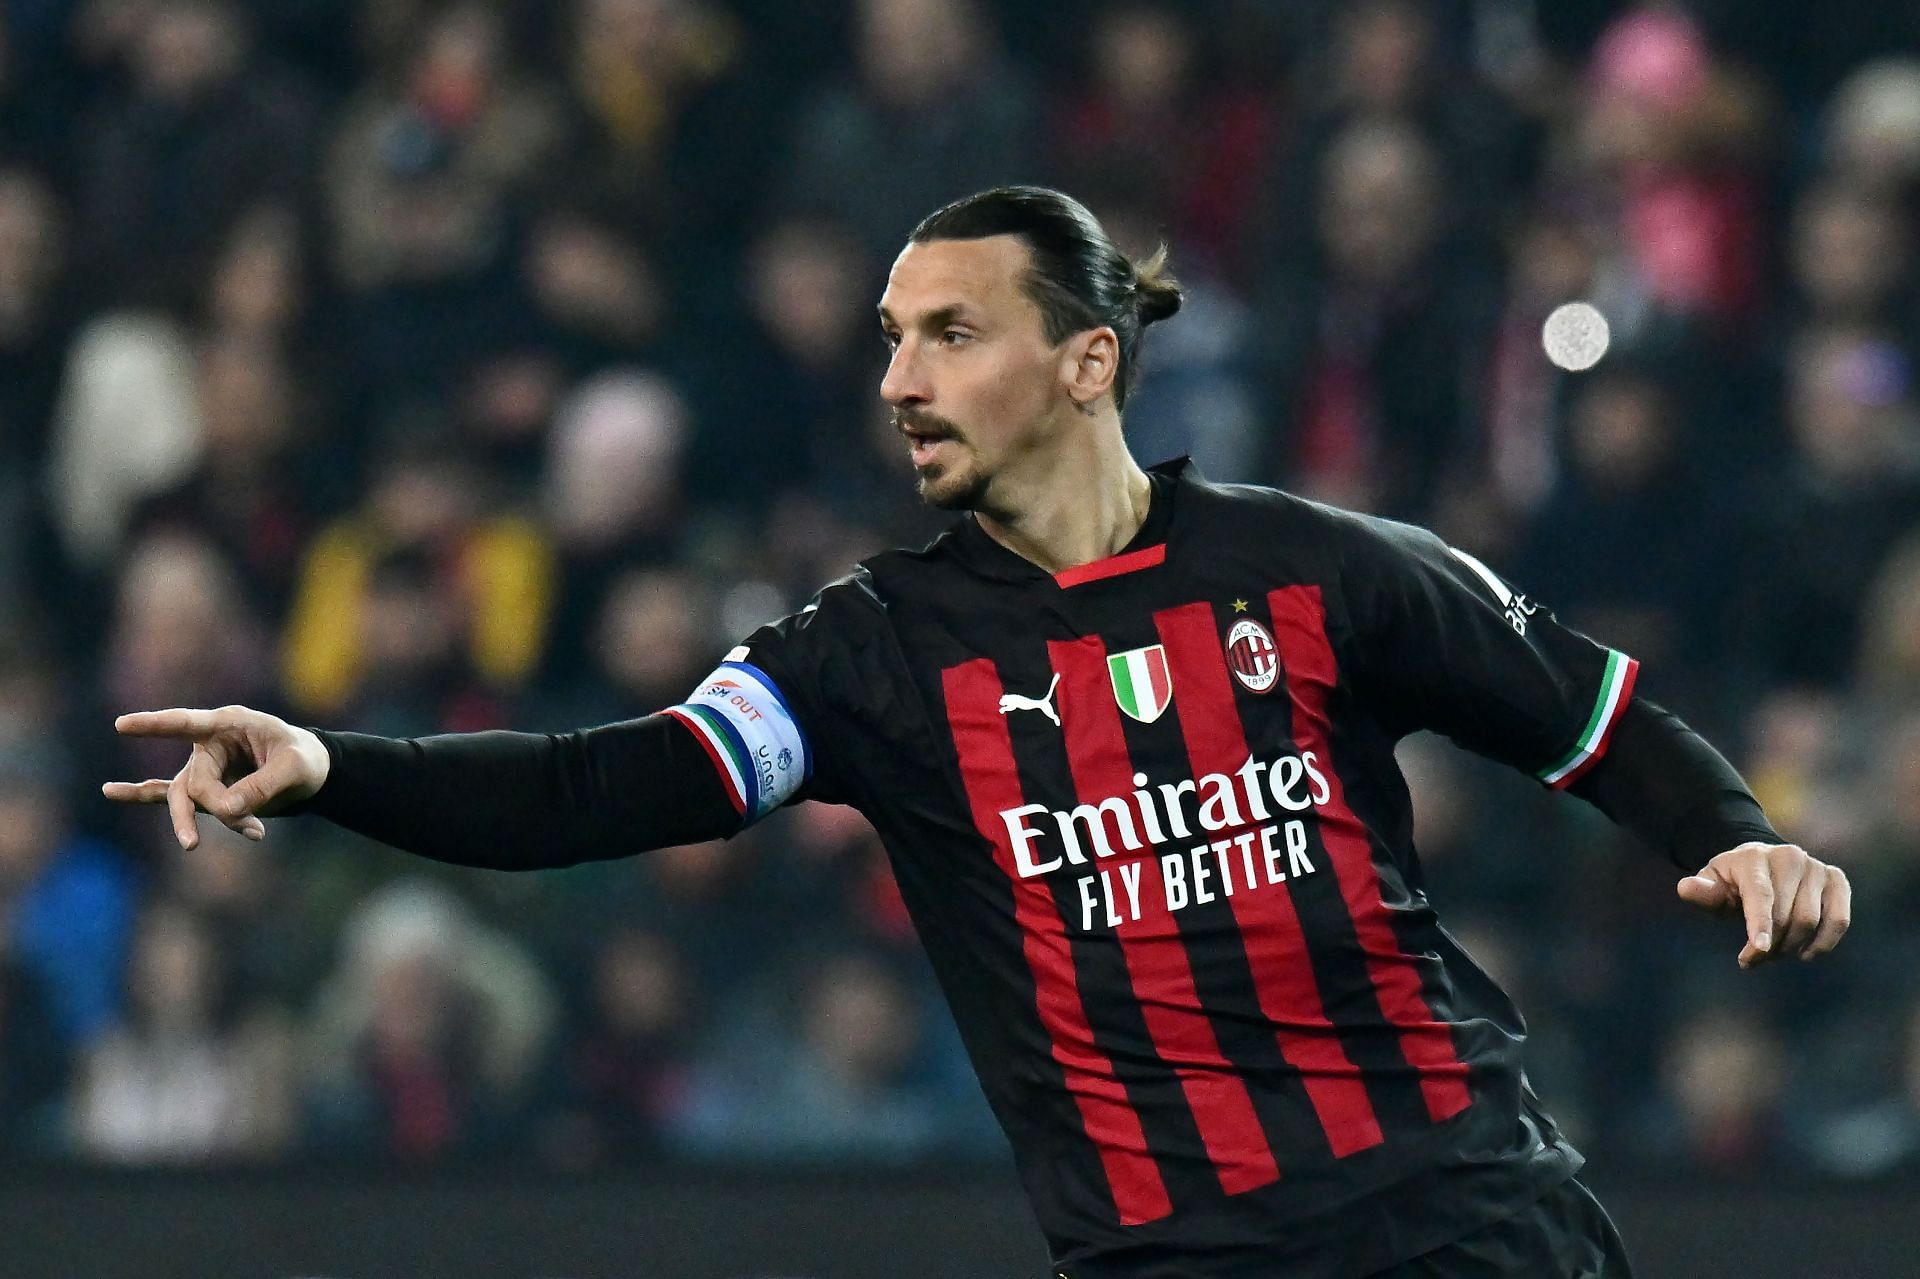 Ibrahimovic wanted to stay at Milan in 2012.